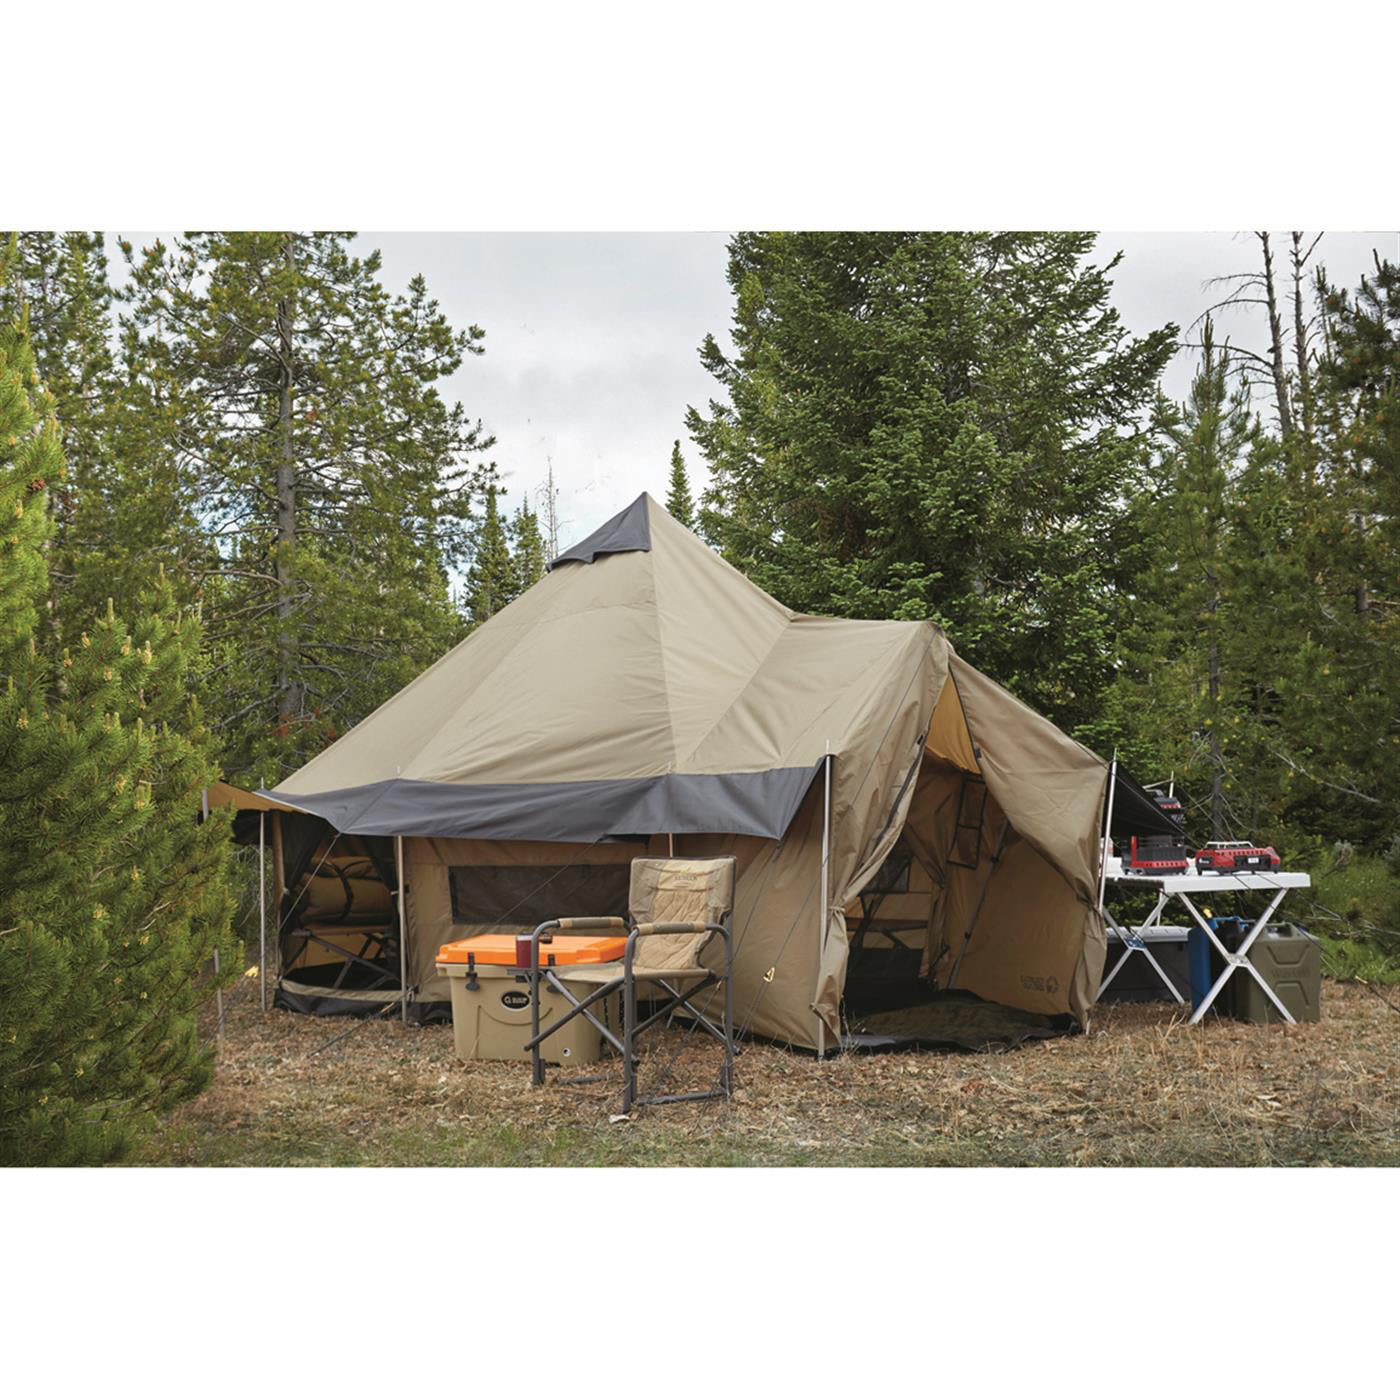 Guide Gear Base Camp Tent, Outdoor, Hiking, Hunting, Four Season